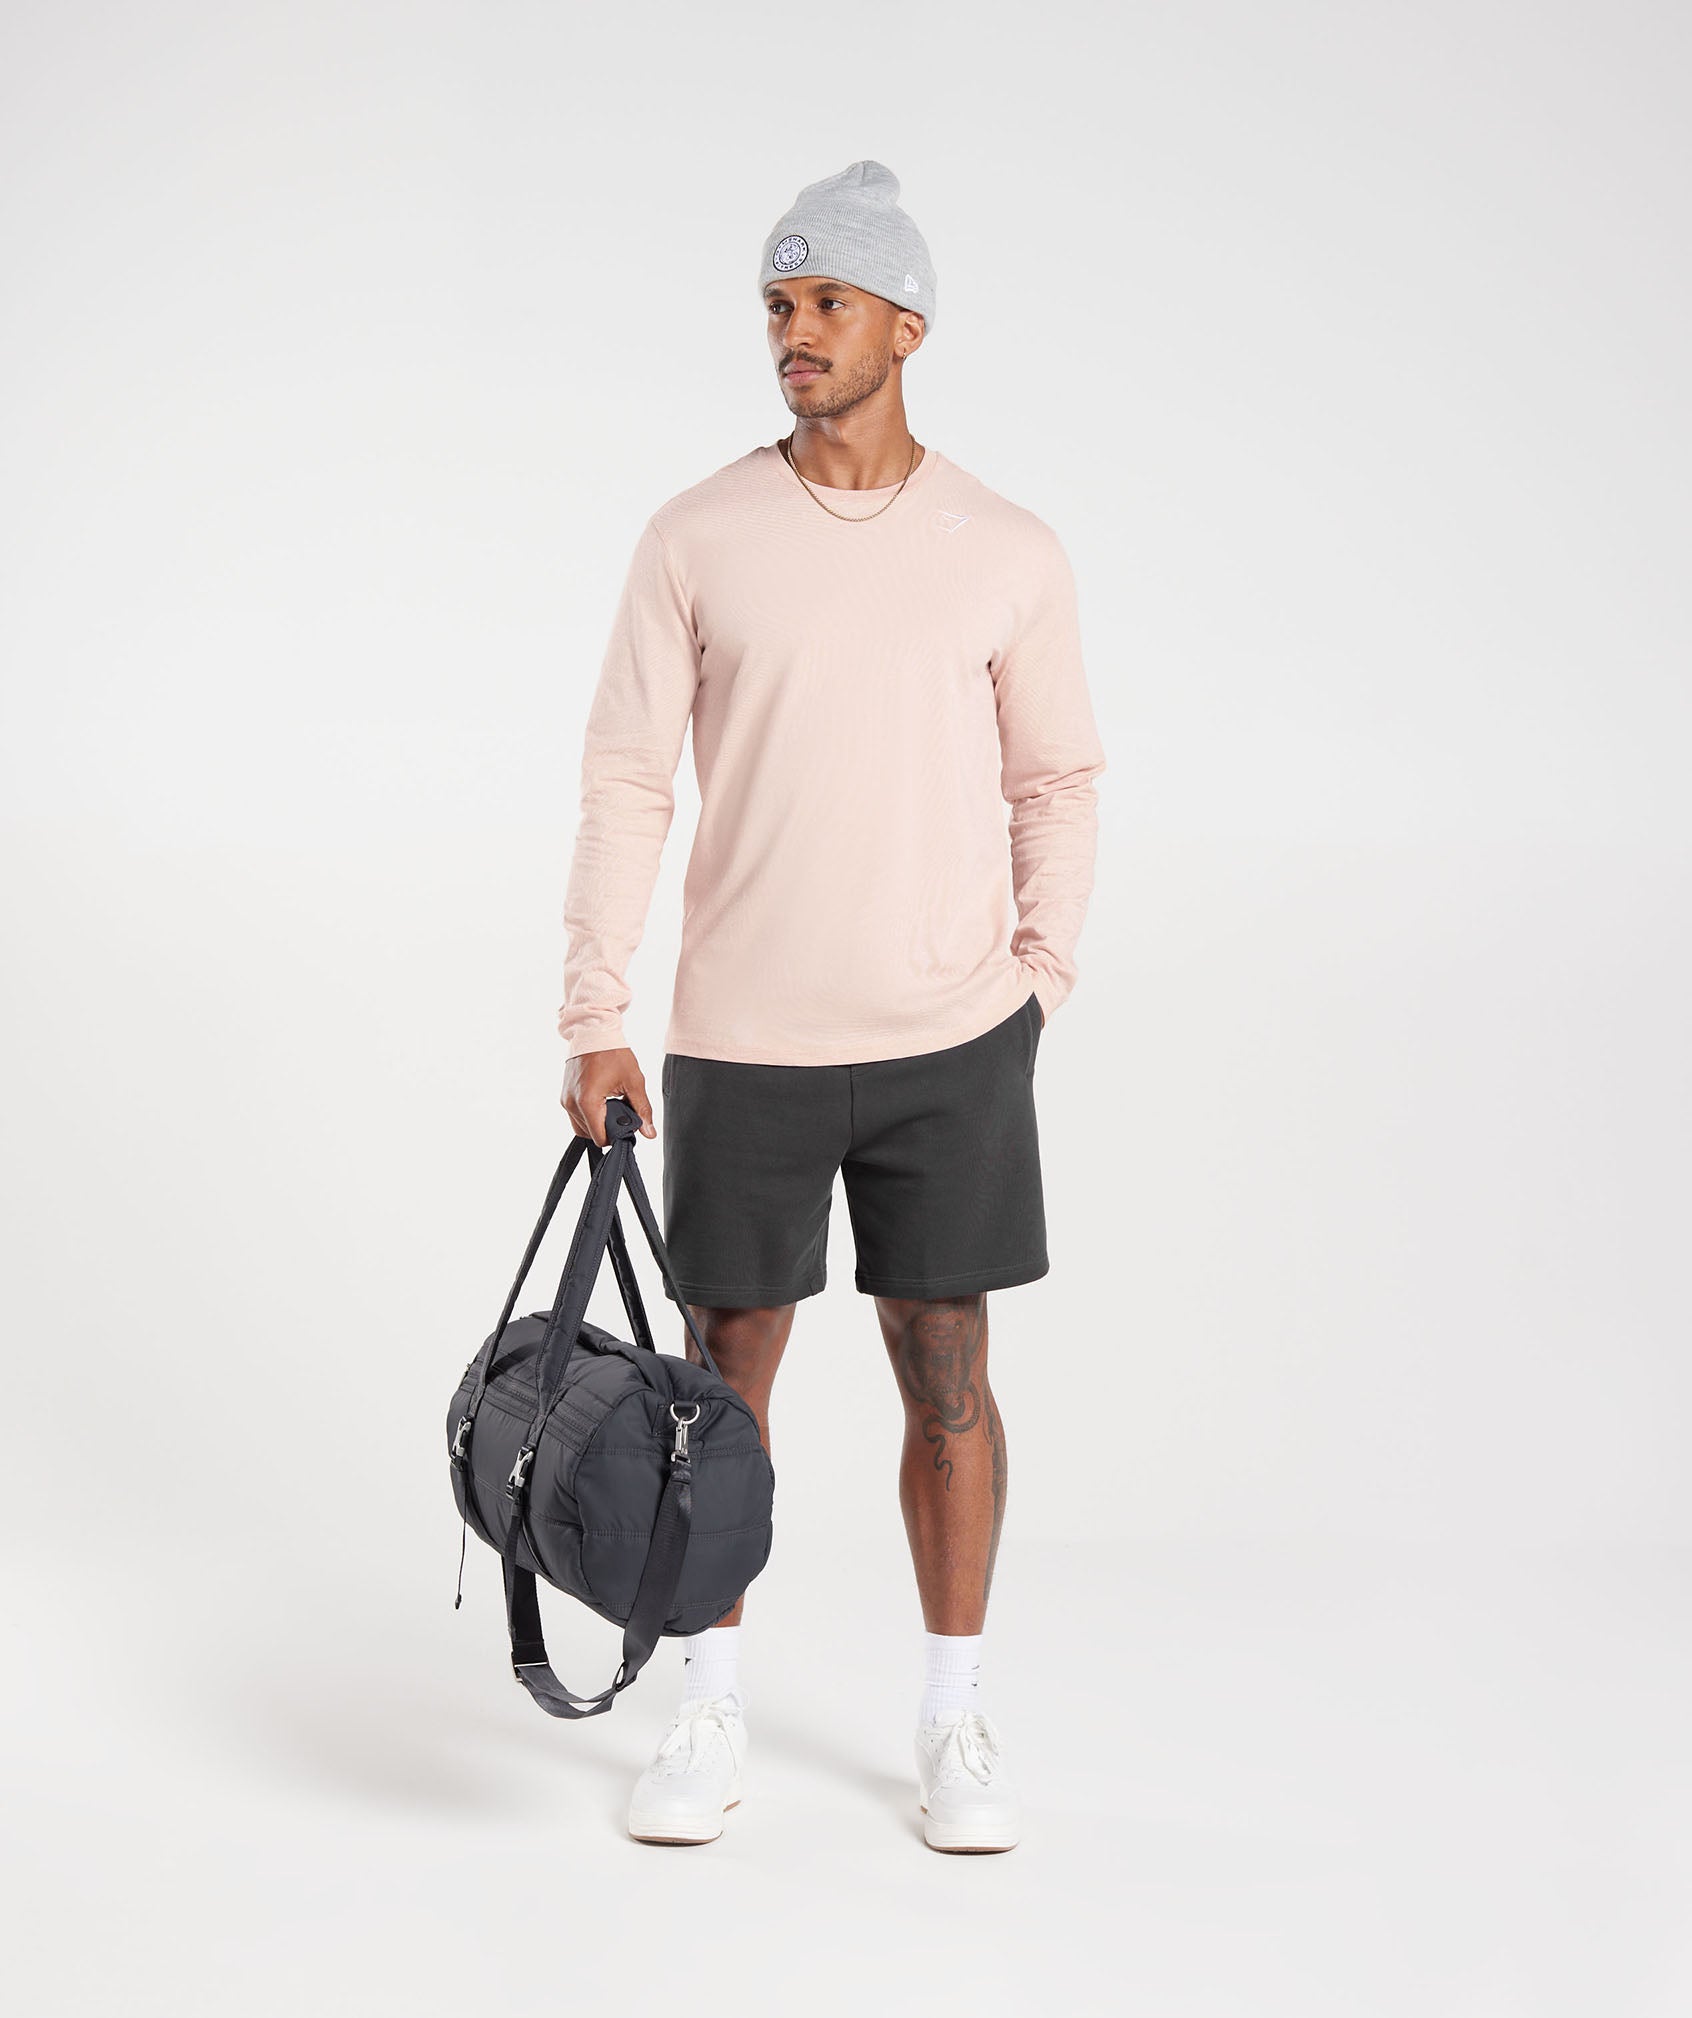 Crest Long Sleeve T-Shirt in Misty Pink - view 4